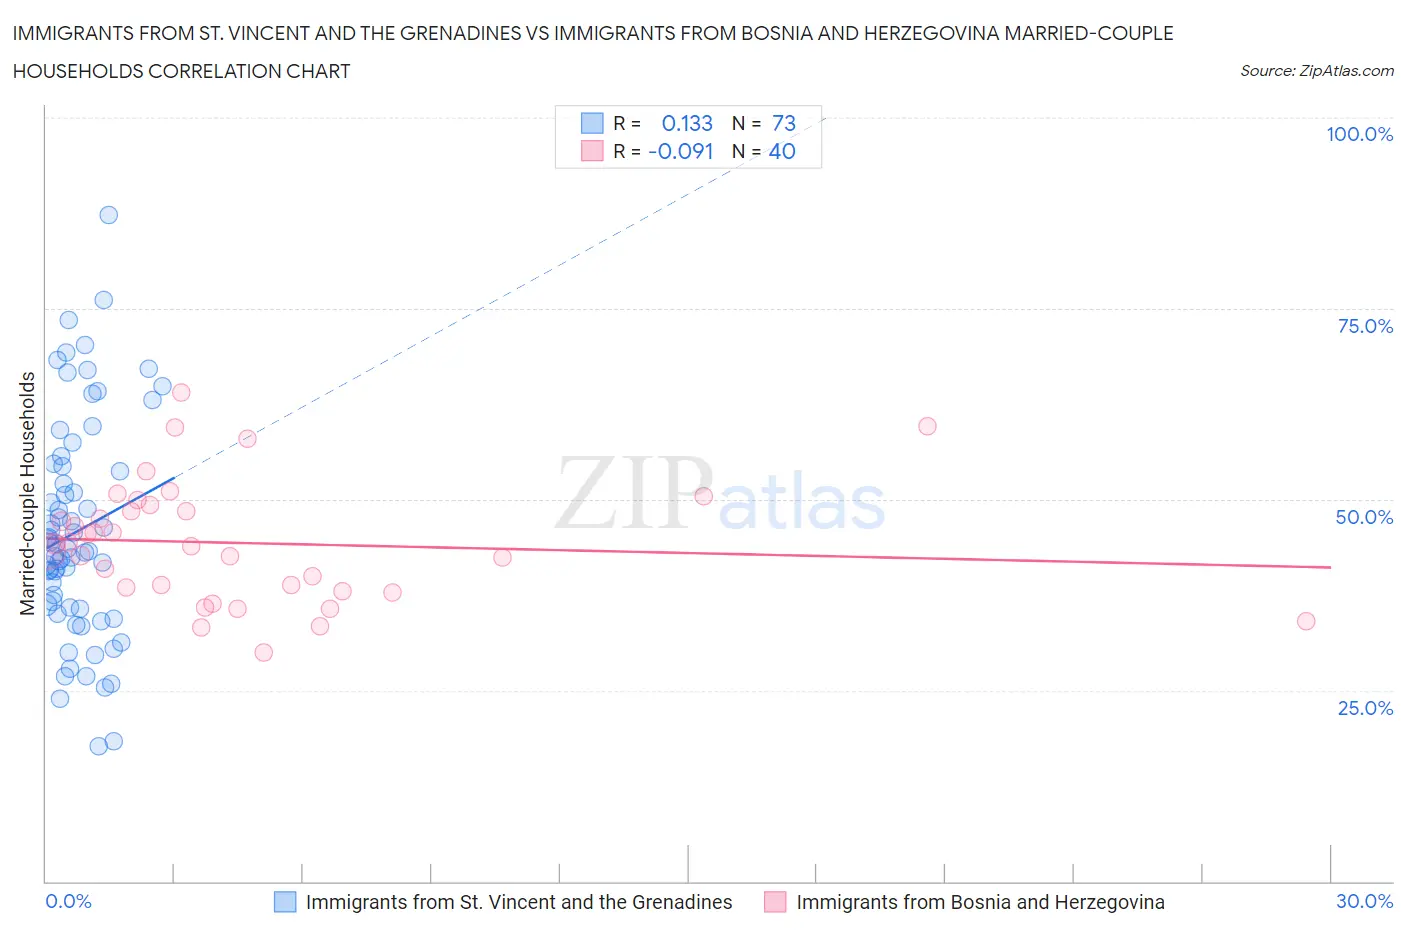 Immigrants from St. Vincent and the Grenadines vs Immigrants from Bosnia and Herzegovina Married-couple Households